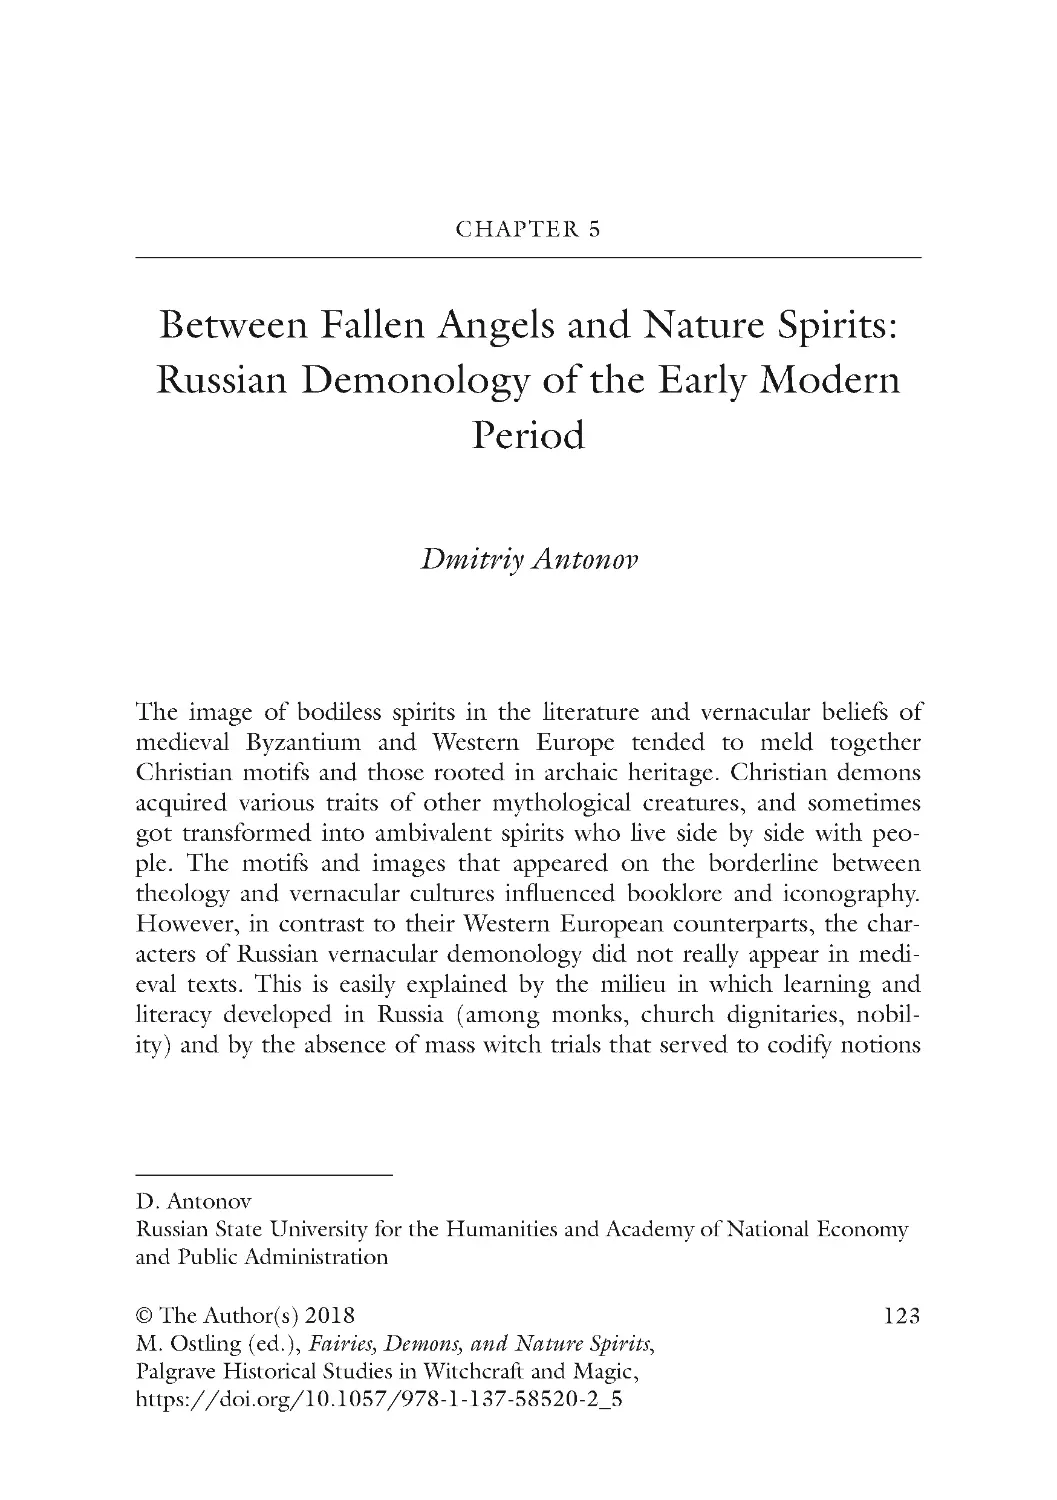 Chapter 5 Between Fallen Angels and Nature Spirits: Russian Demonology of the Early Modern Period